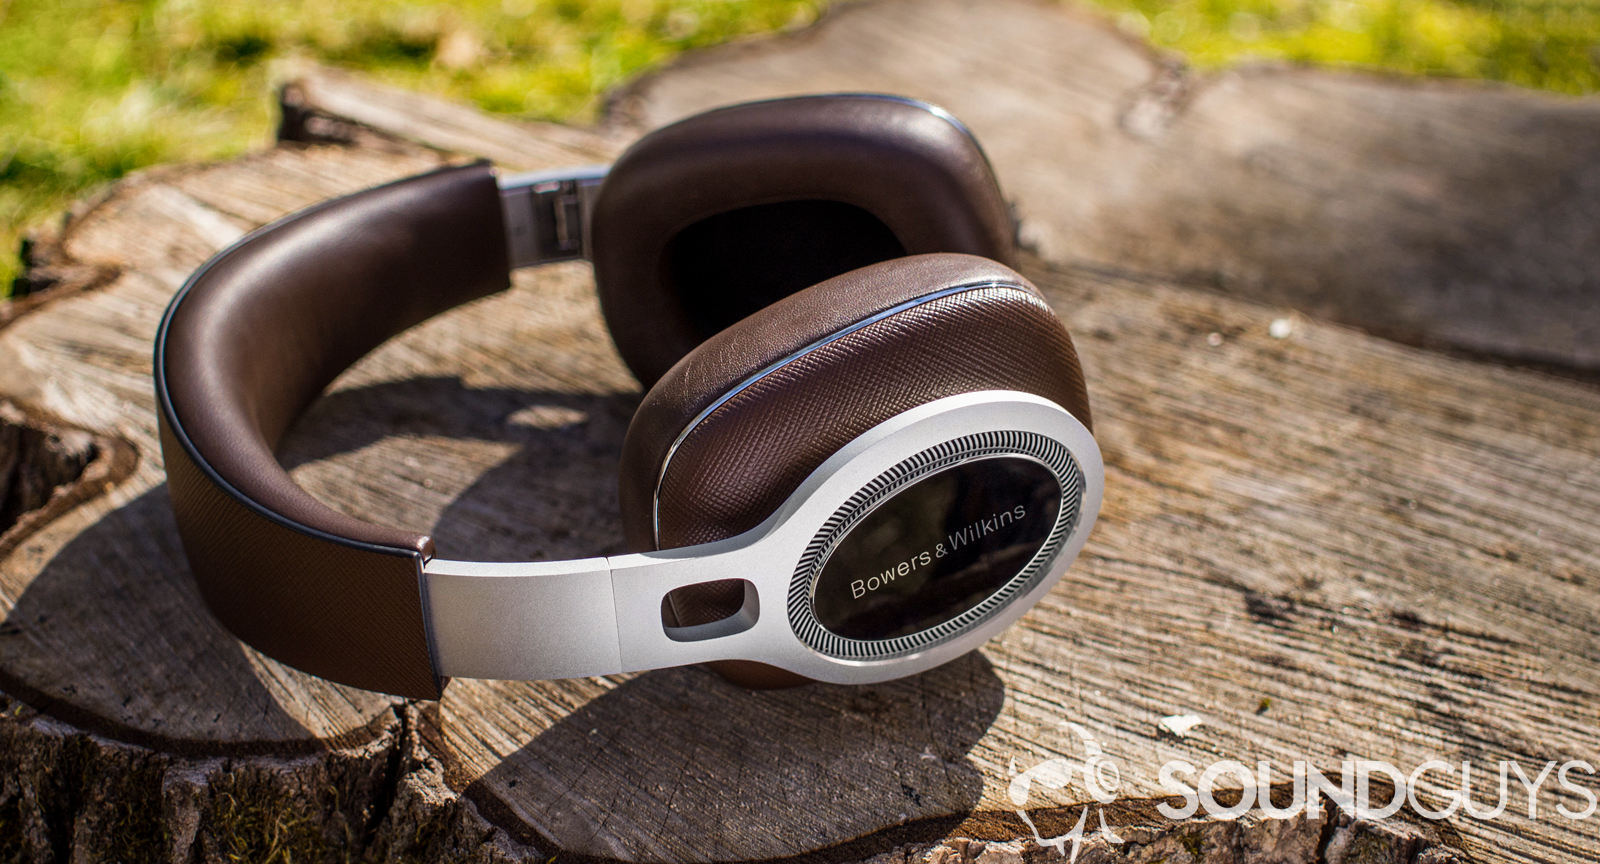 A photo of the Bowers and Wilkins P9 Signature headphones resting on a stump.